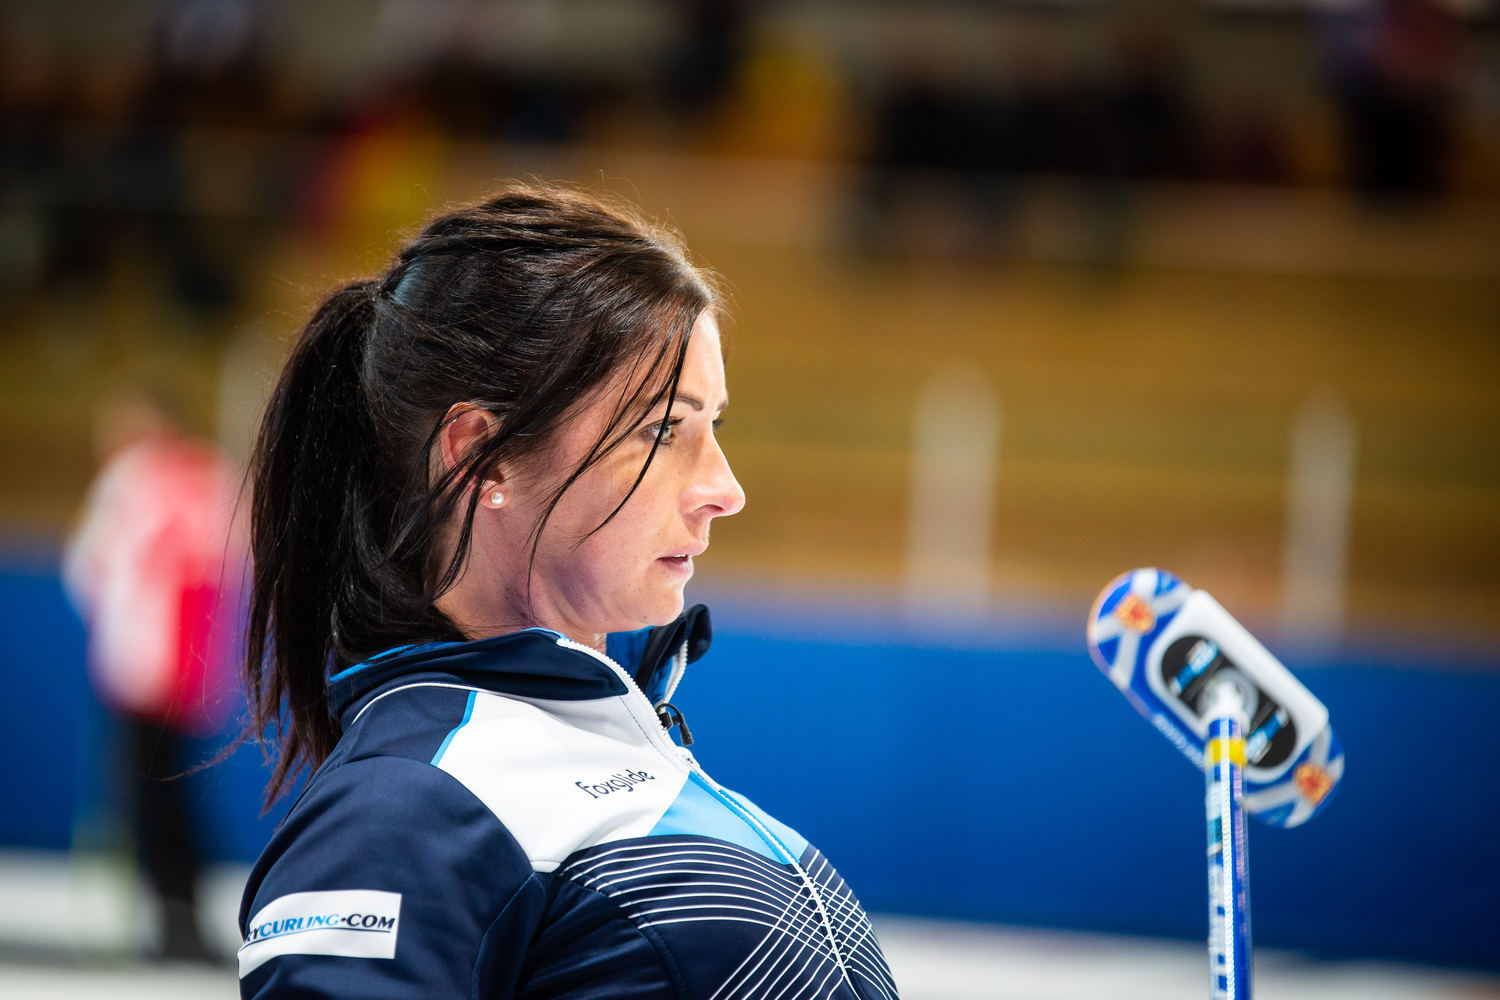 Scotland and Canada earn playoff spots at World Mixed Doubles Curling Championship